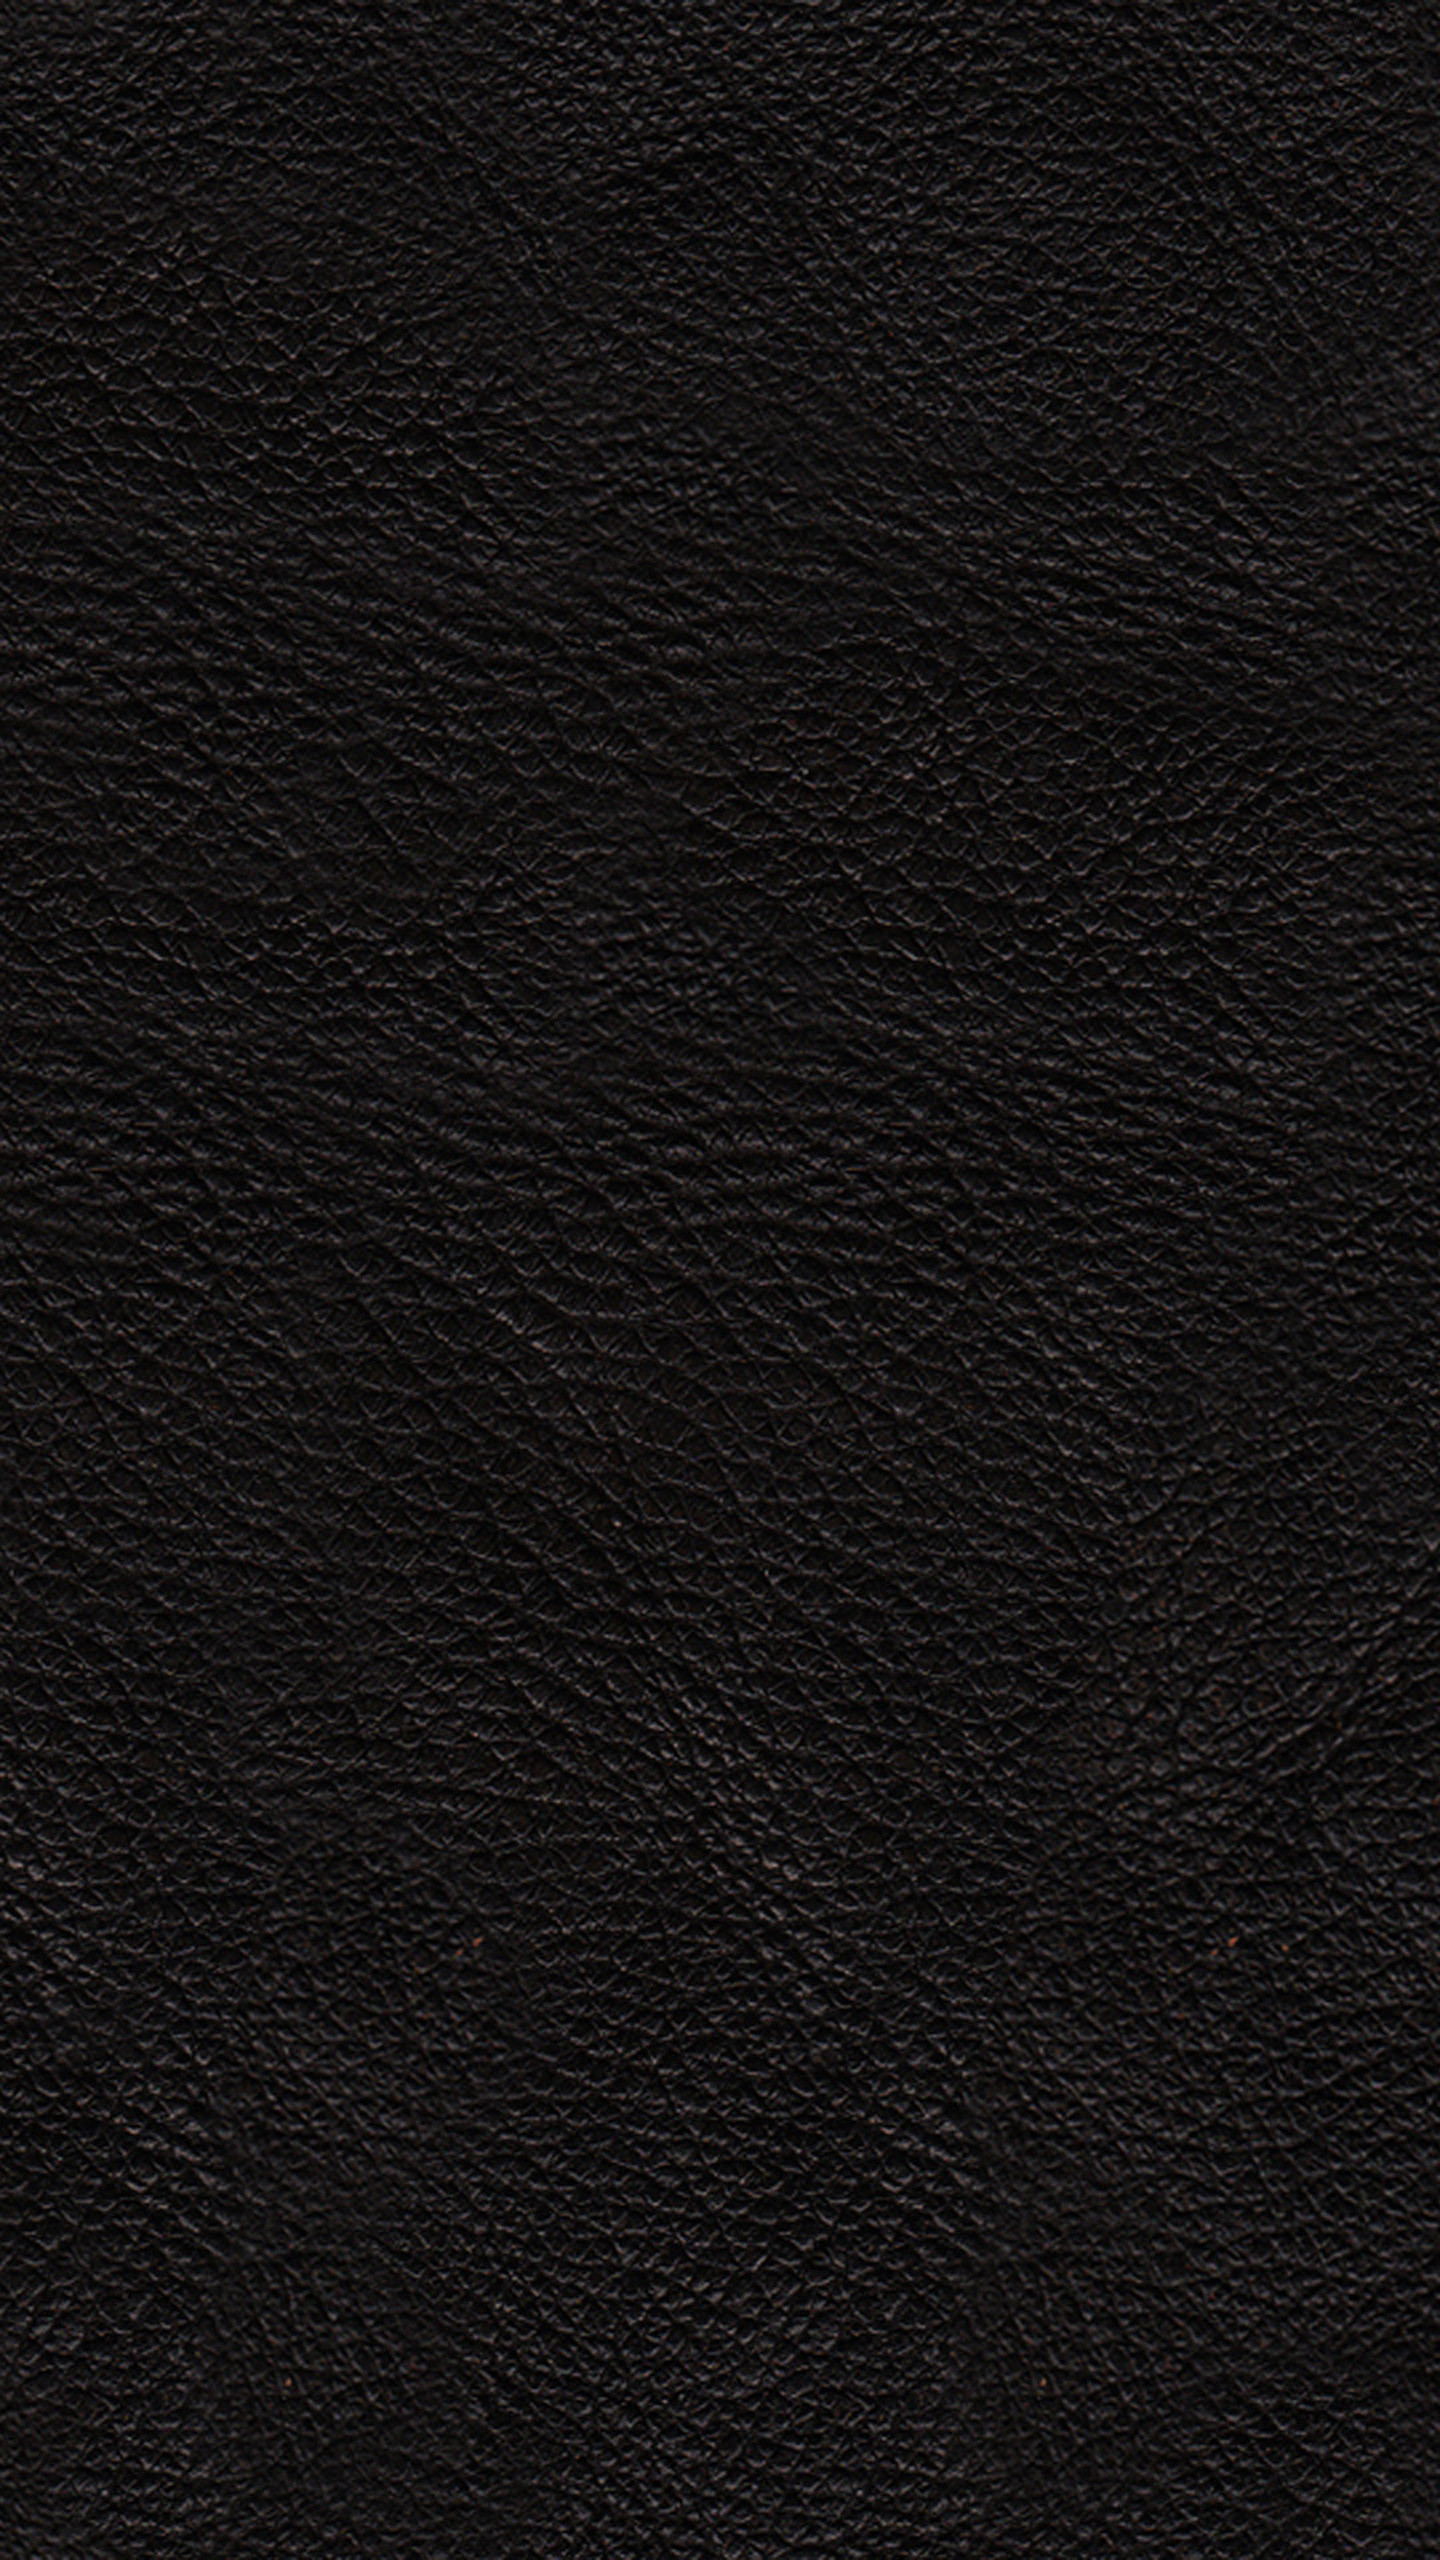 Lg G3 Wallpapers Hd, Wallpapers Hd, G3 Wallpaper - Black Leather Background Phone - HD Wallpaper 